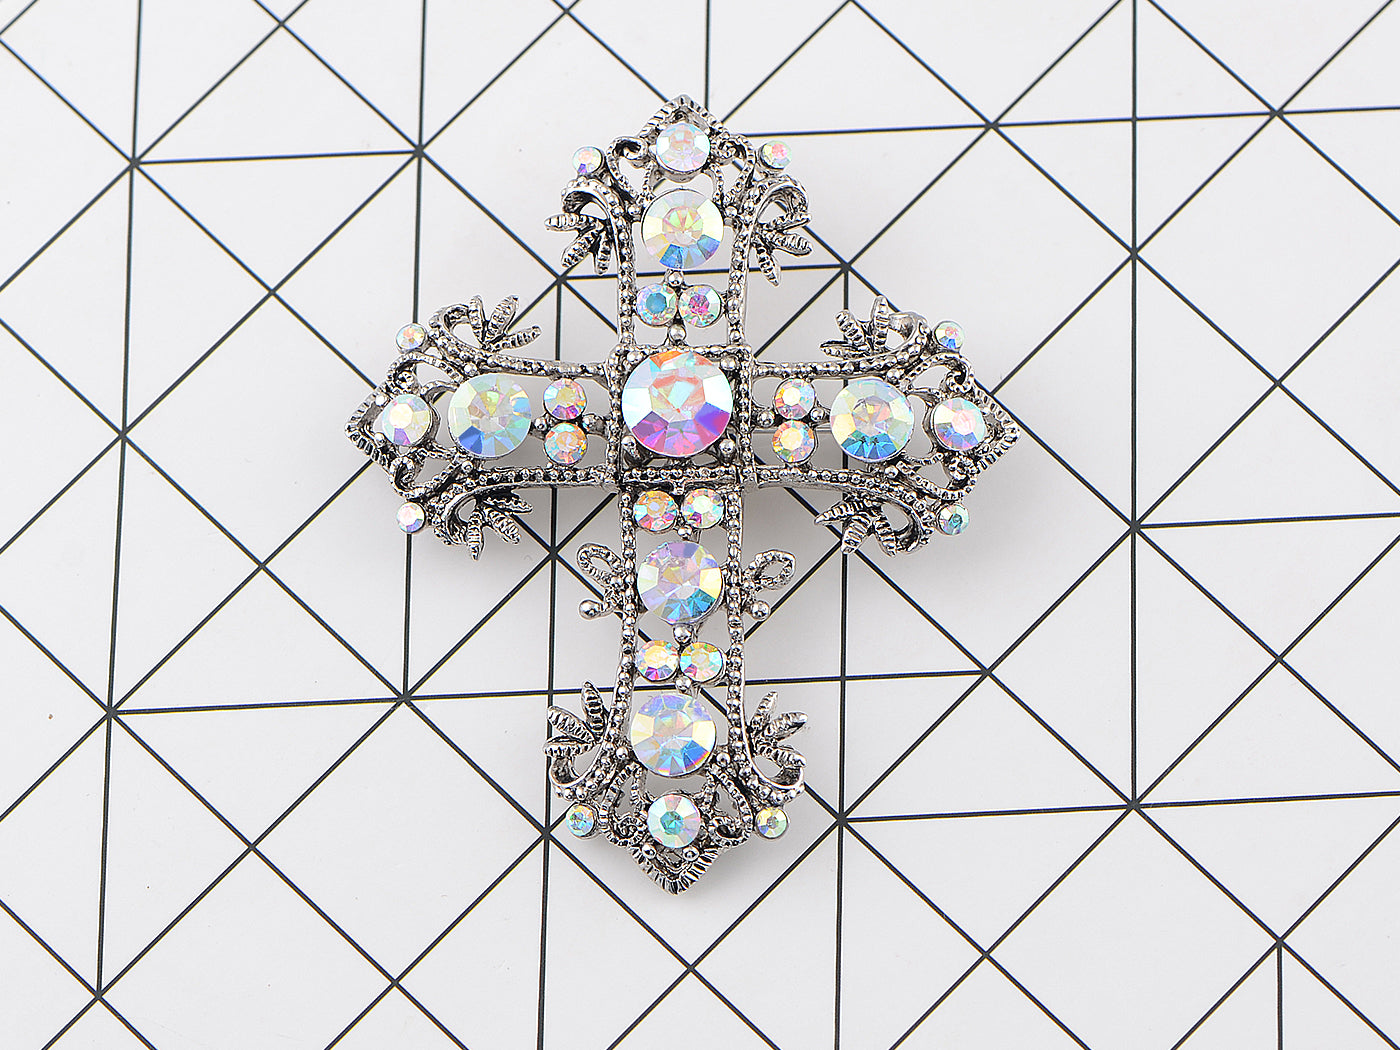 Antique Multi Colorful Holy Cross Brooch Pin